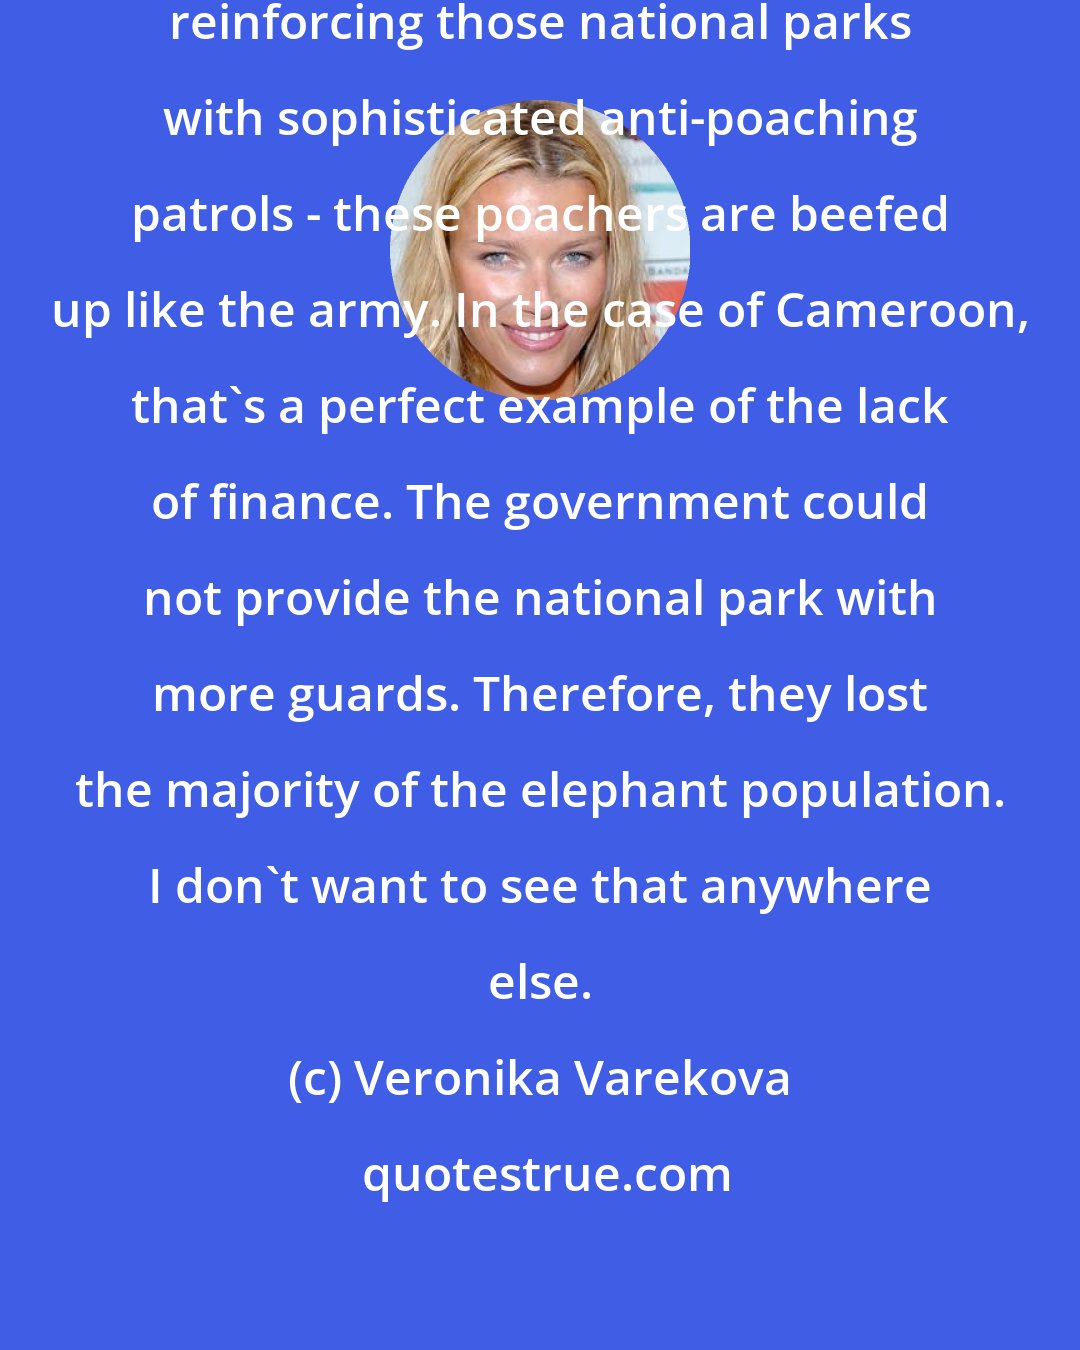 Veronika Varekova: In terms of economical aspects, reinforcing those national parks with sophisticated anti-poaching patrols - these poachers are beefed up like the army. In the case of Cameroon, that's a perfect example of the lack of finance. The government could not provide the national park with more guards. Therefore, they lost the majority of the elephant population. I don't want to see that anywhere else.